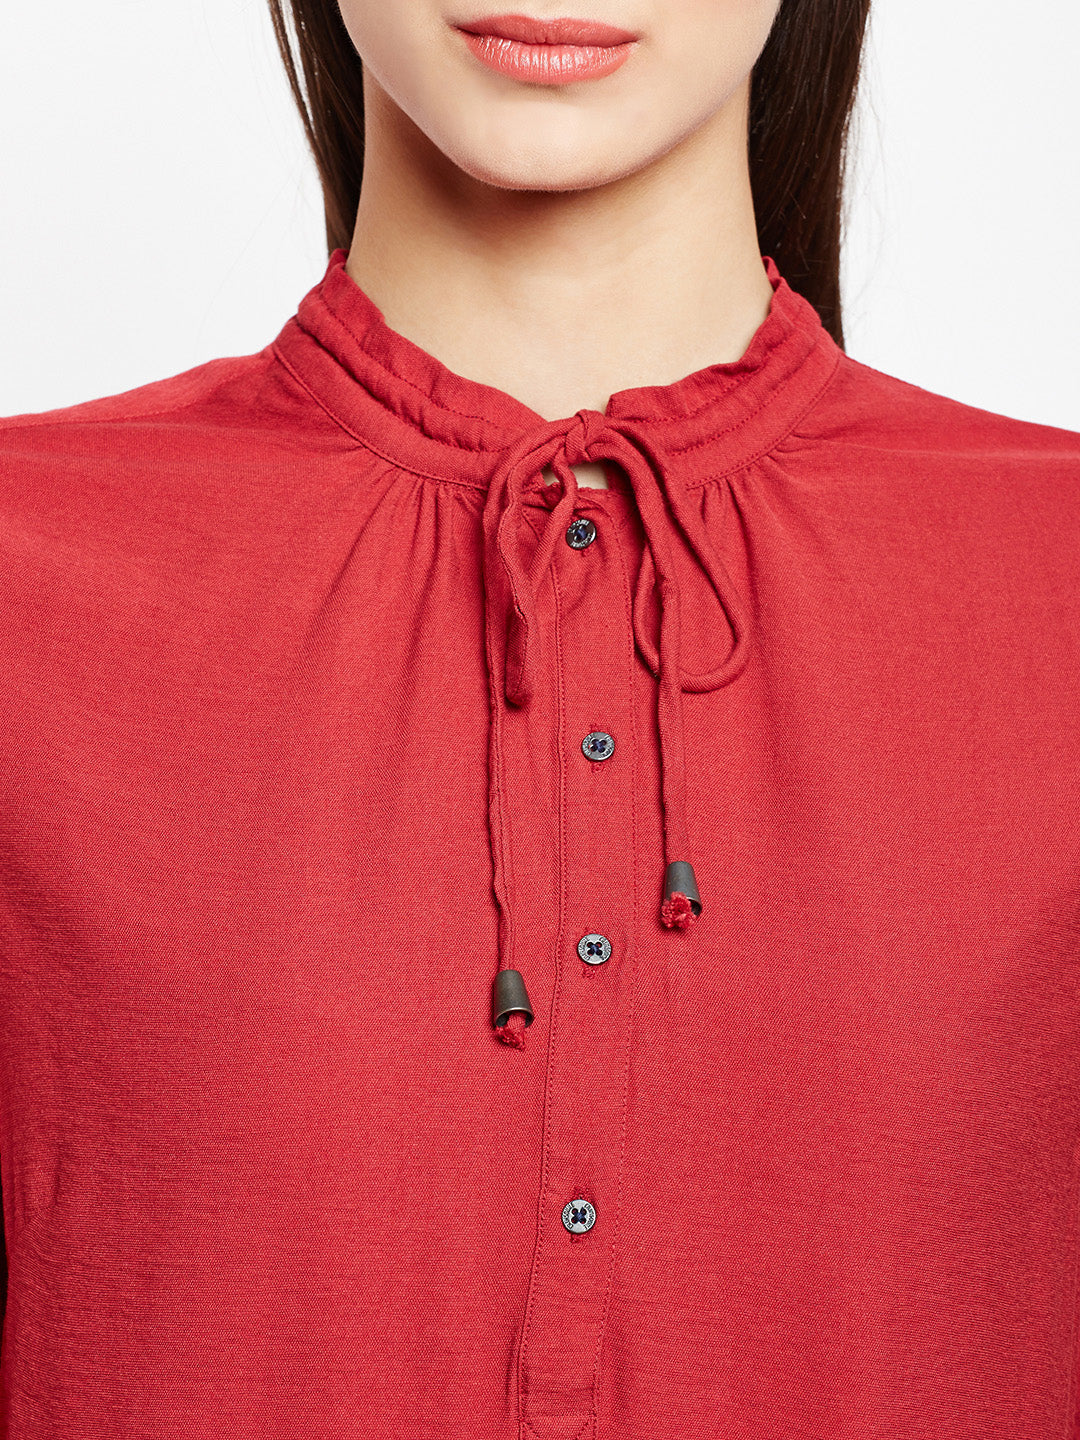 Red Tie-up Neck Roll up Sleeves Top - Women Tops